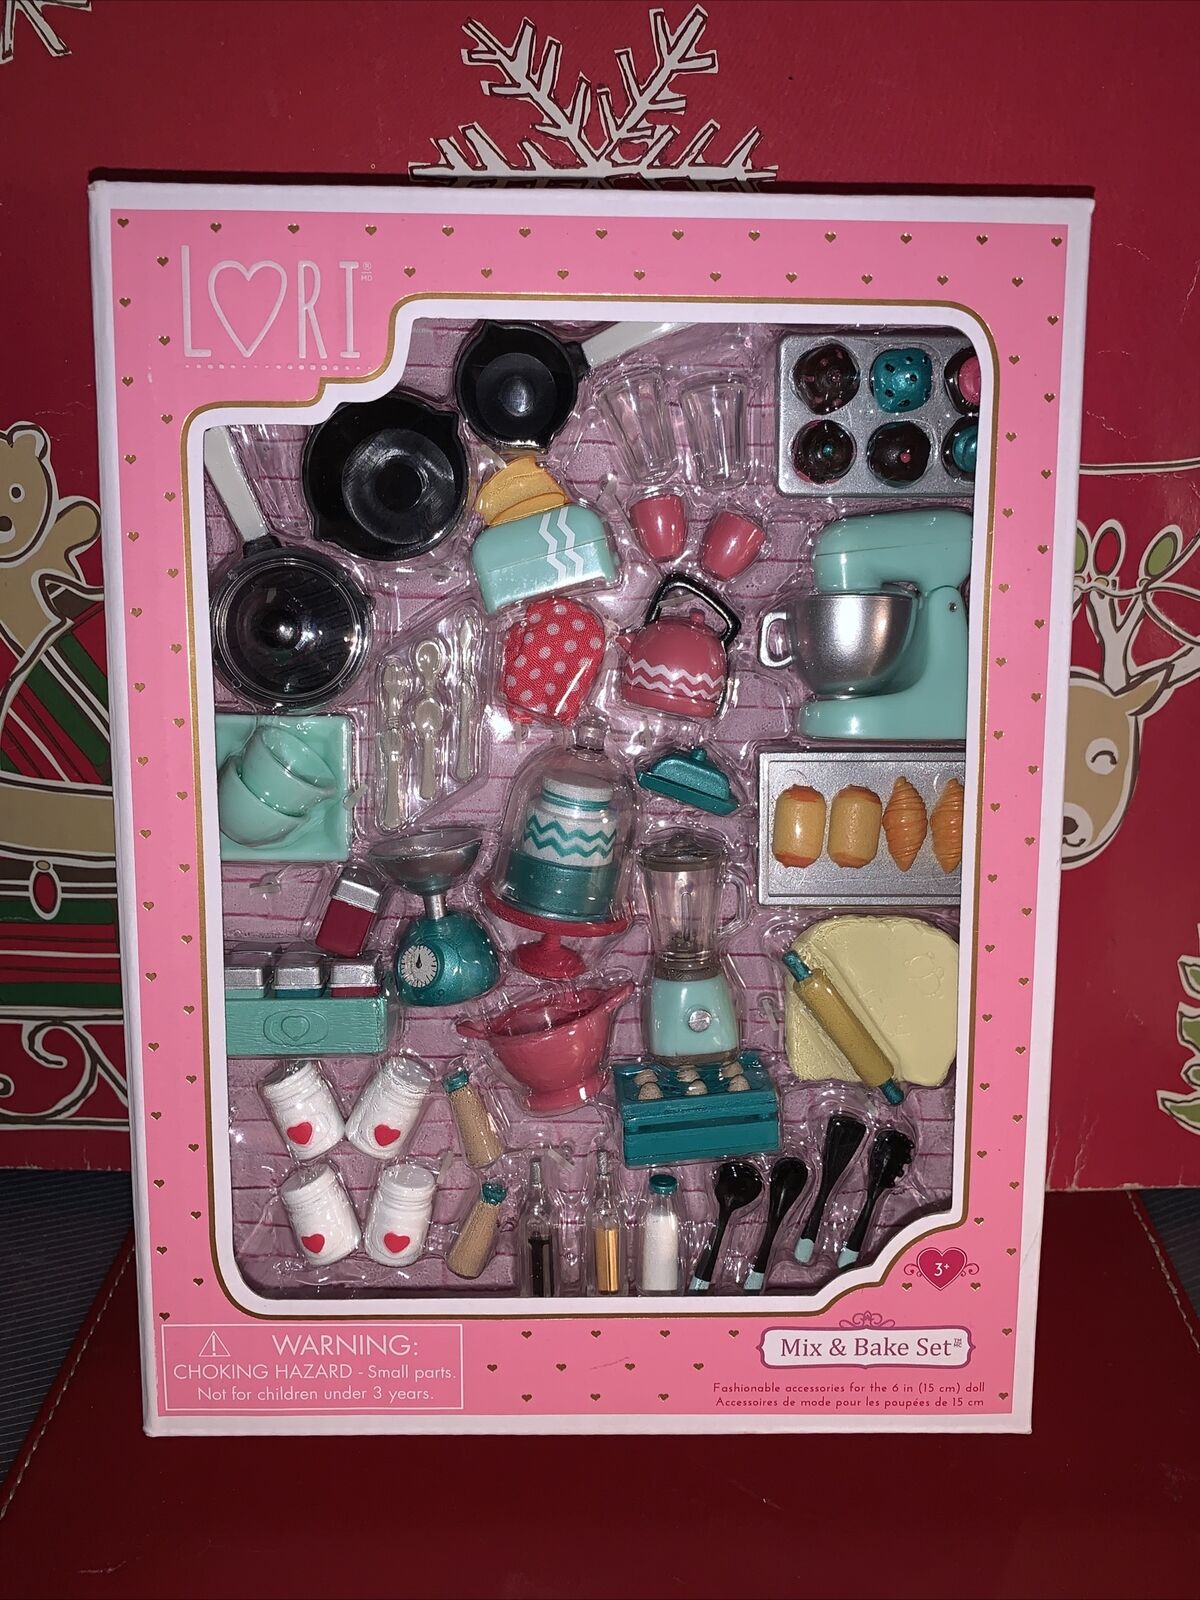 Lori By Our Generation Mix & Bake Set Cooking & Baking Accessories For 6" Doll!